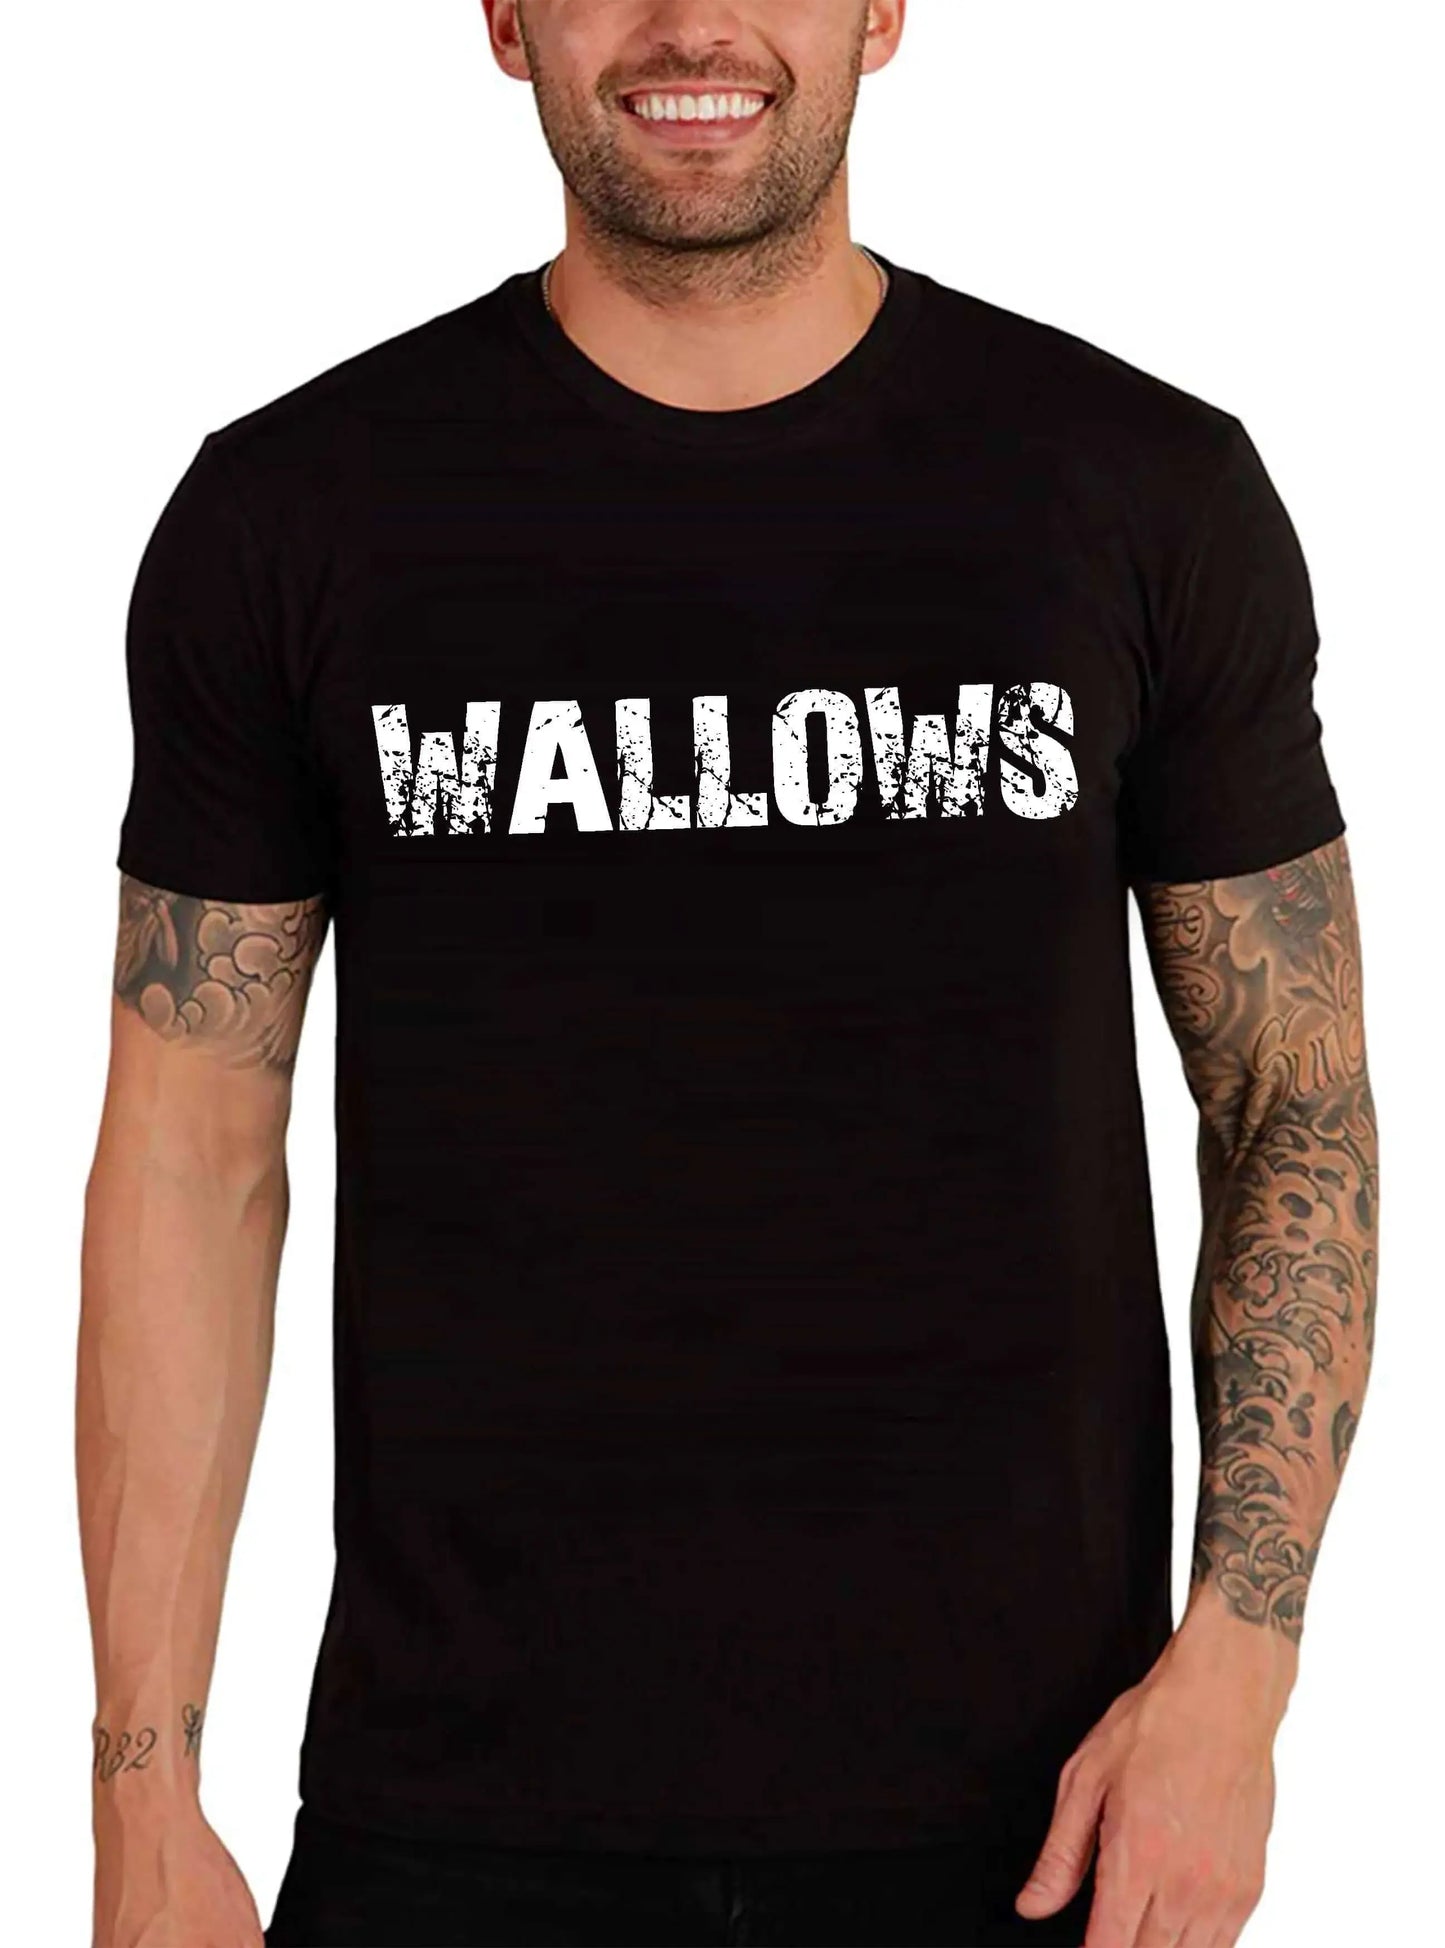 Men's Graphic T-Shirt Wallows Eco-Friendly Limited Edition Short Sleeve Tee-Shirt Vintage Birthday Gift Novelty